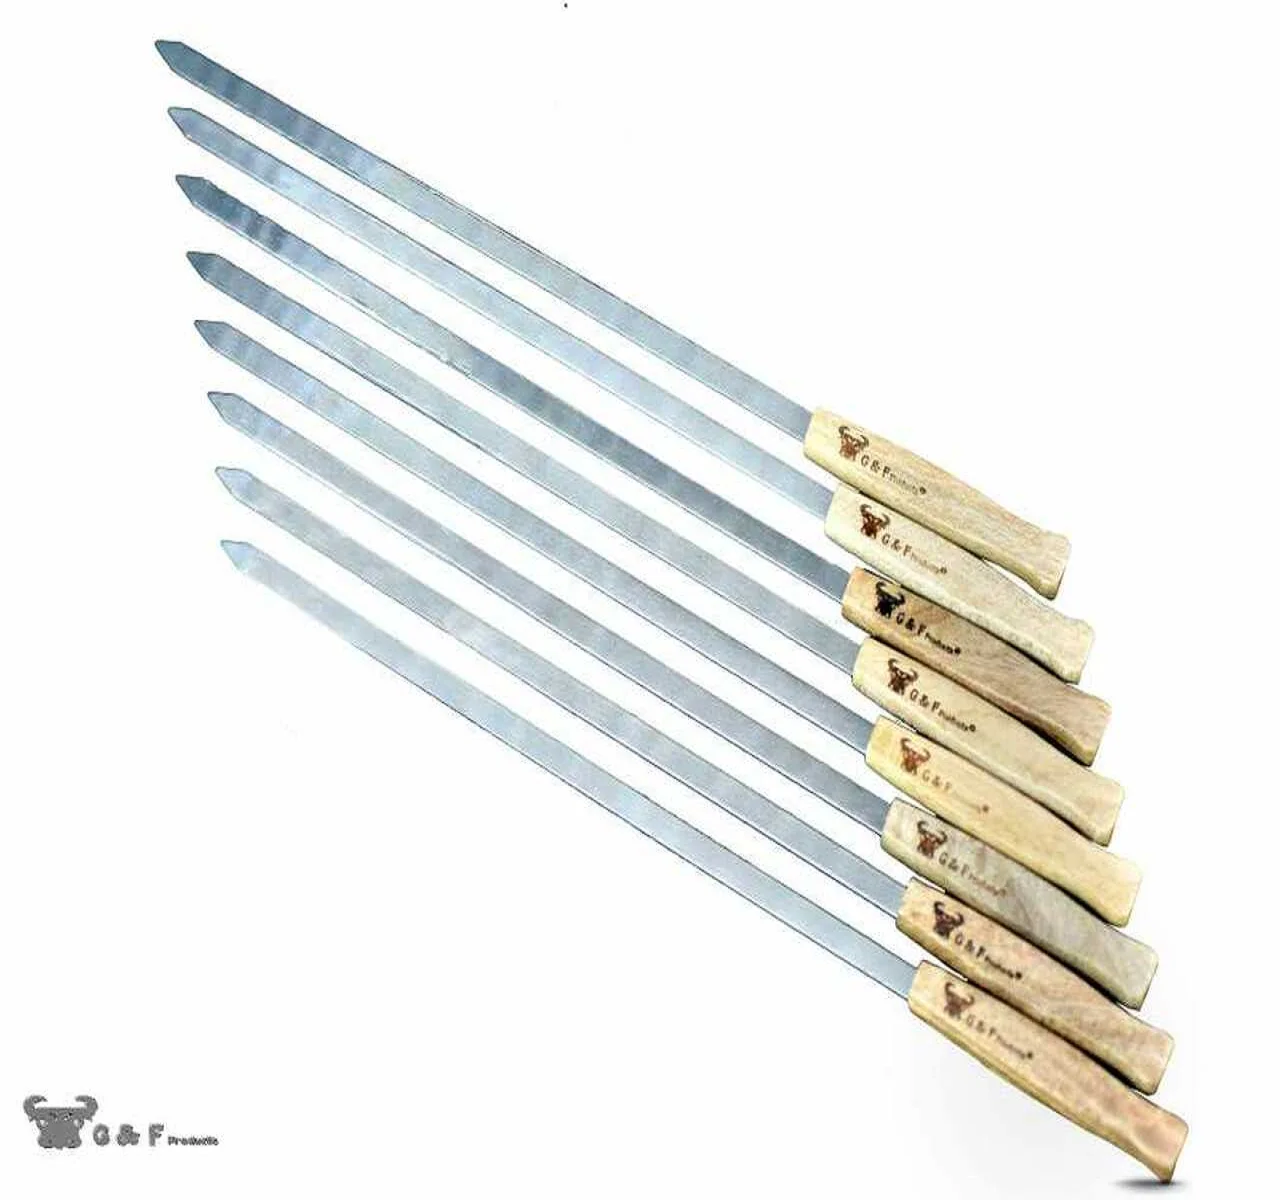 wth heavy duty Travel Bag Half-Inch Wide Blade G & F Products 17-Inch Long 25618 Large Stainless Steel Brazilian-Style BBQ Skewers Kebab Kabob Skewers Set of 8 